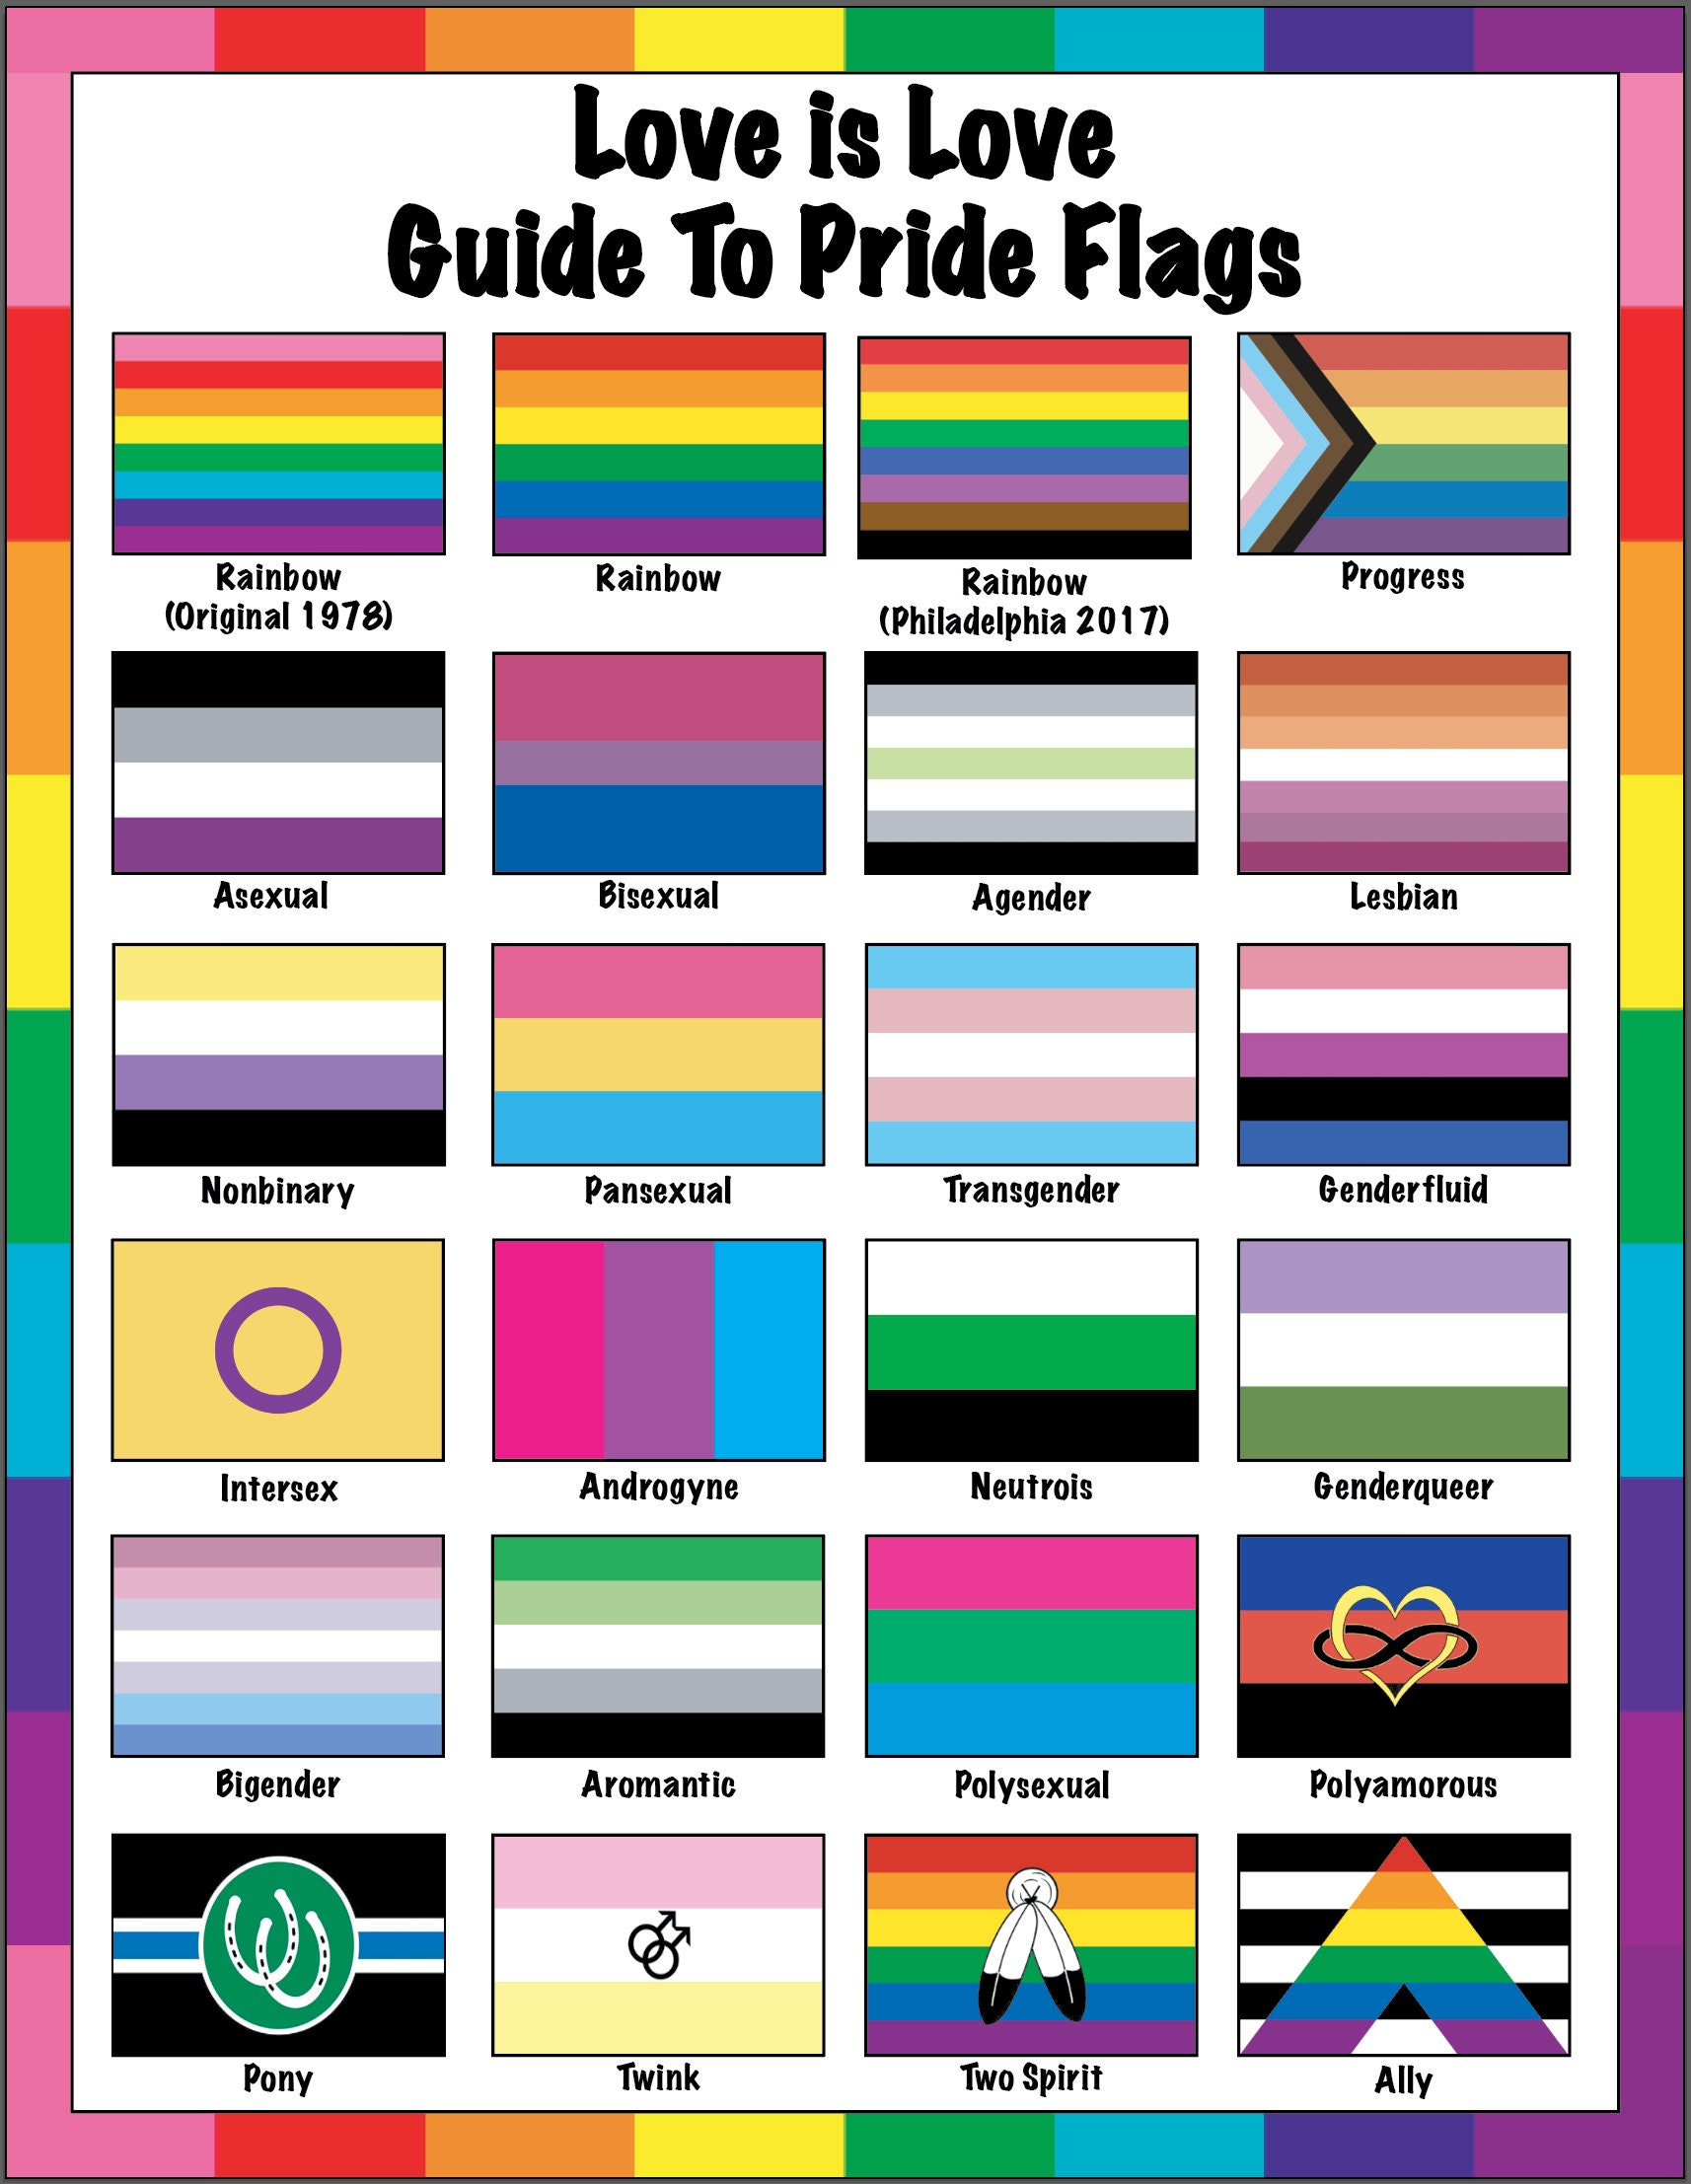 Your ultimate guide to Pride flags